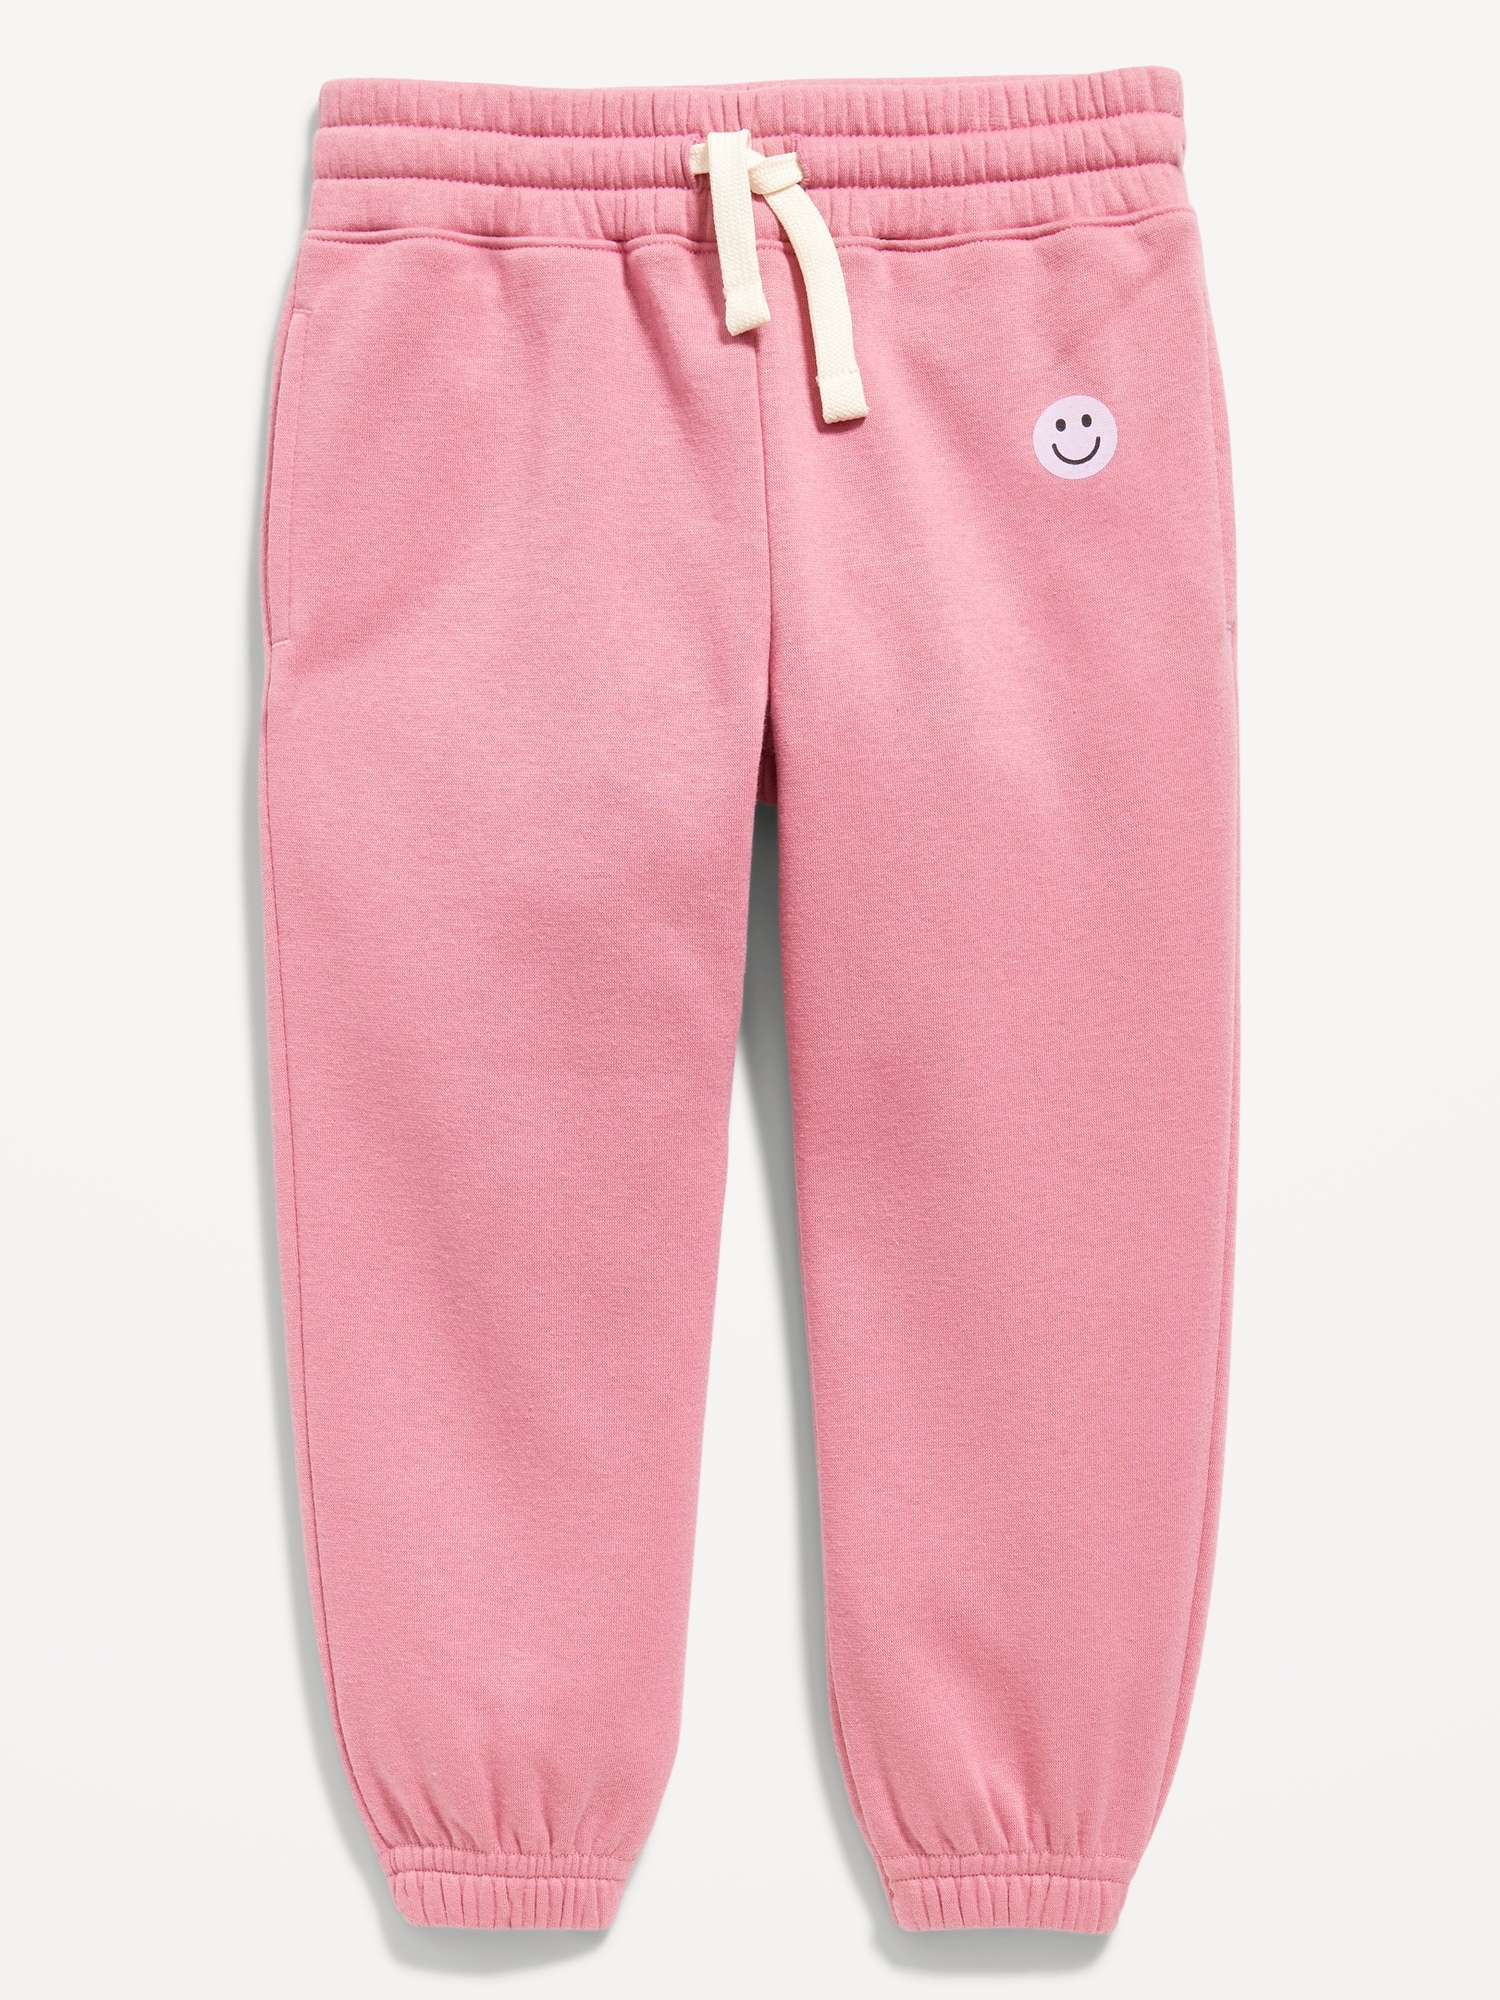 Unisex Cinched-Hem Jogger Sweatpants for Toddlers | Old Navy